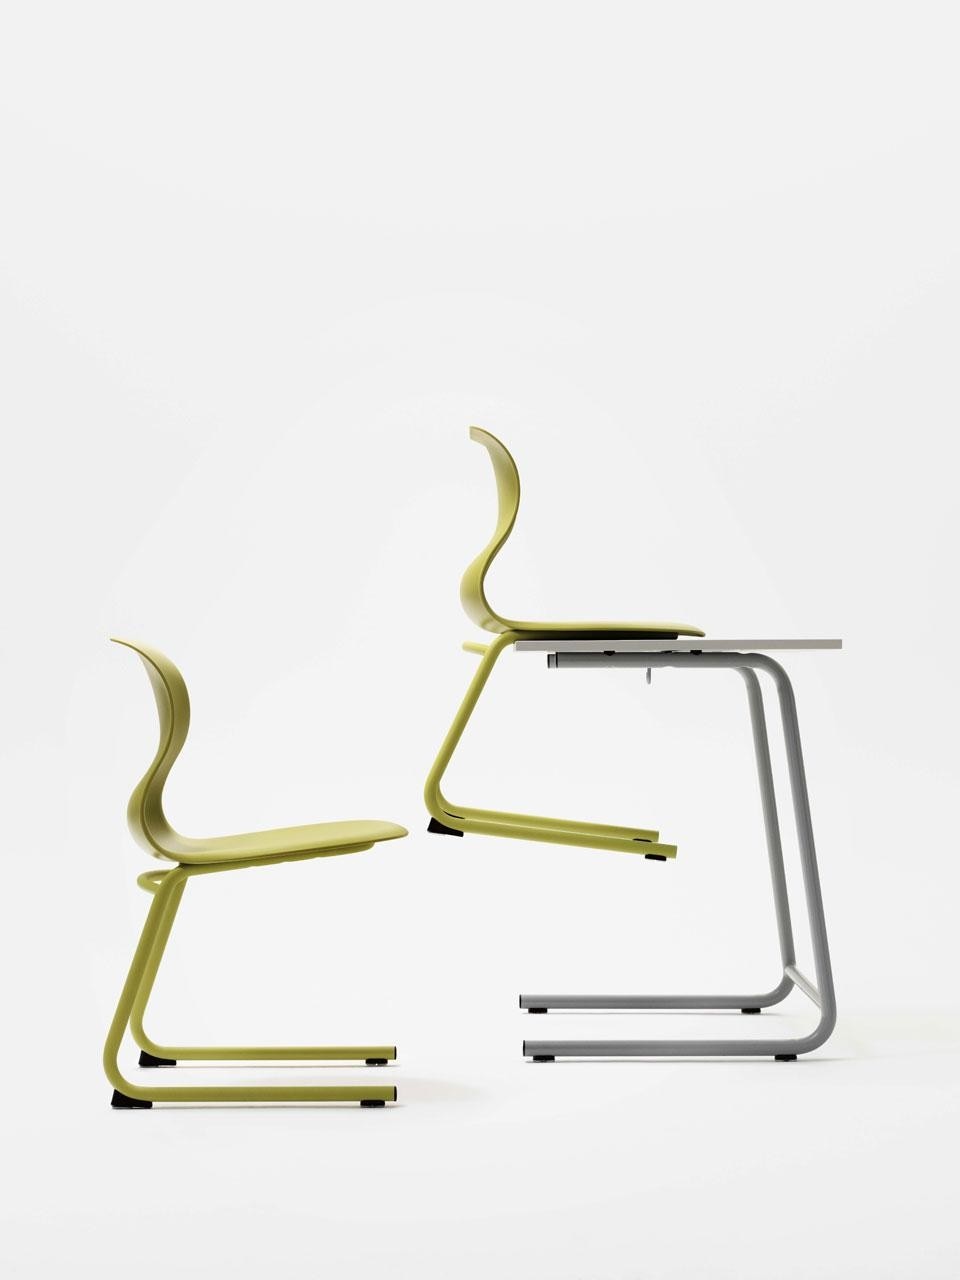 The support structure is made of tubular steel, formed as a C with four legs. Grcic has also designed additional accessories such as cushions for the seat, connecting elements, and trays.